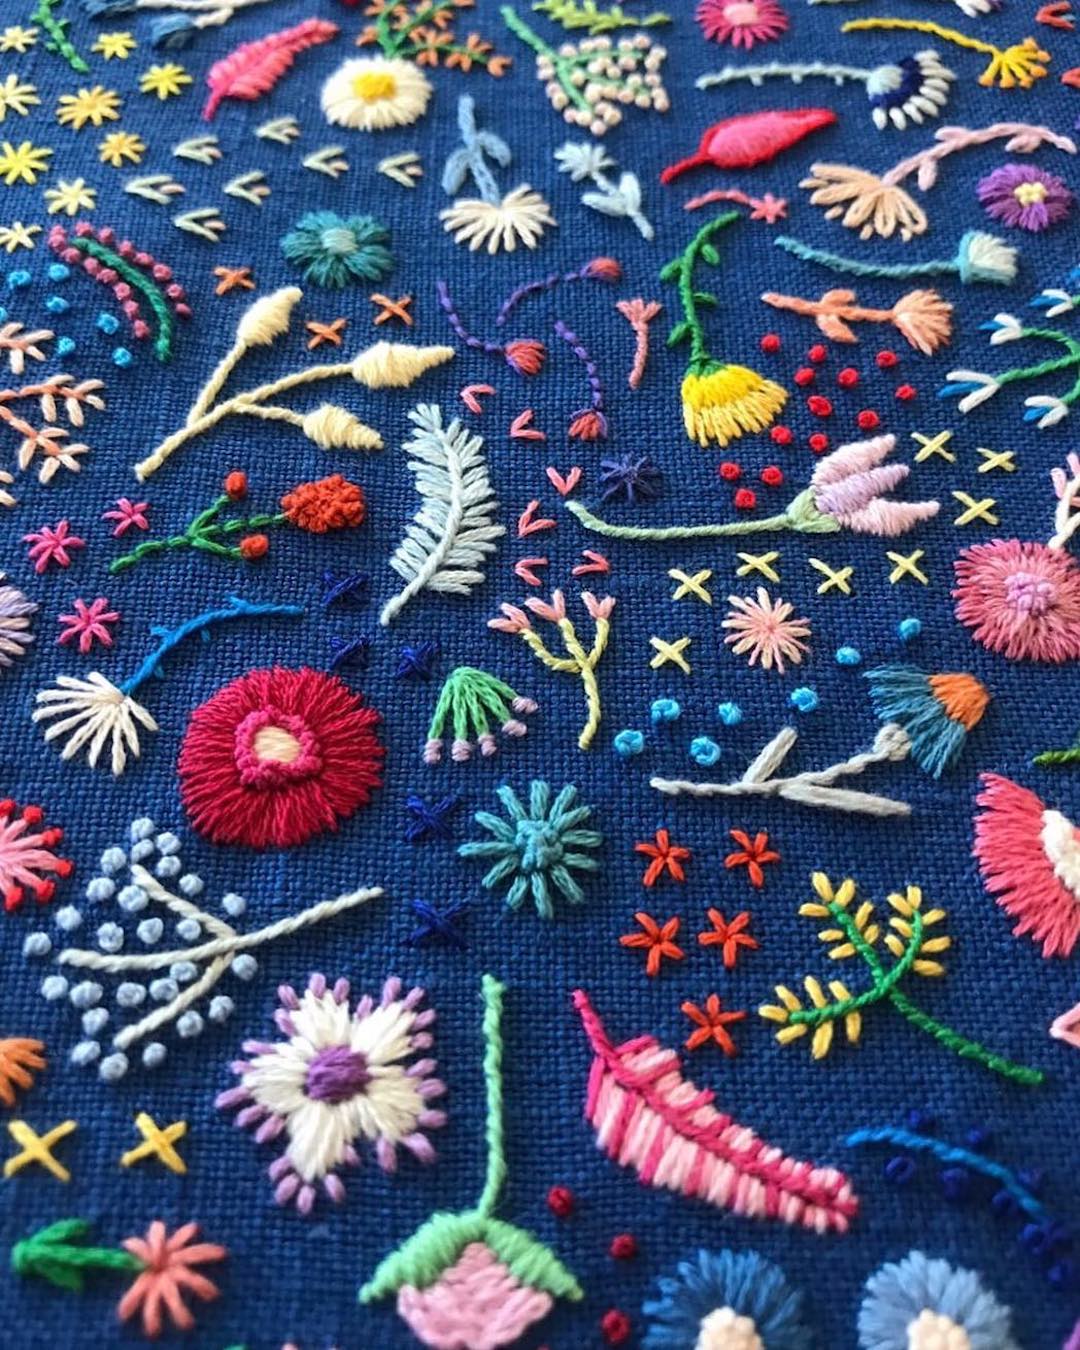 Tiny embroidery by Happy Cactus